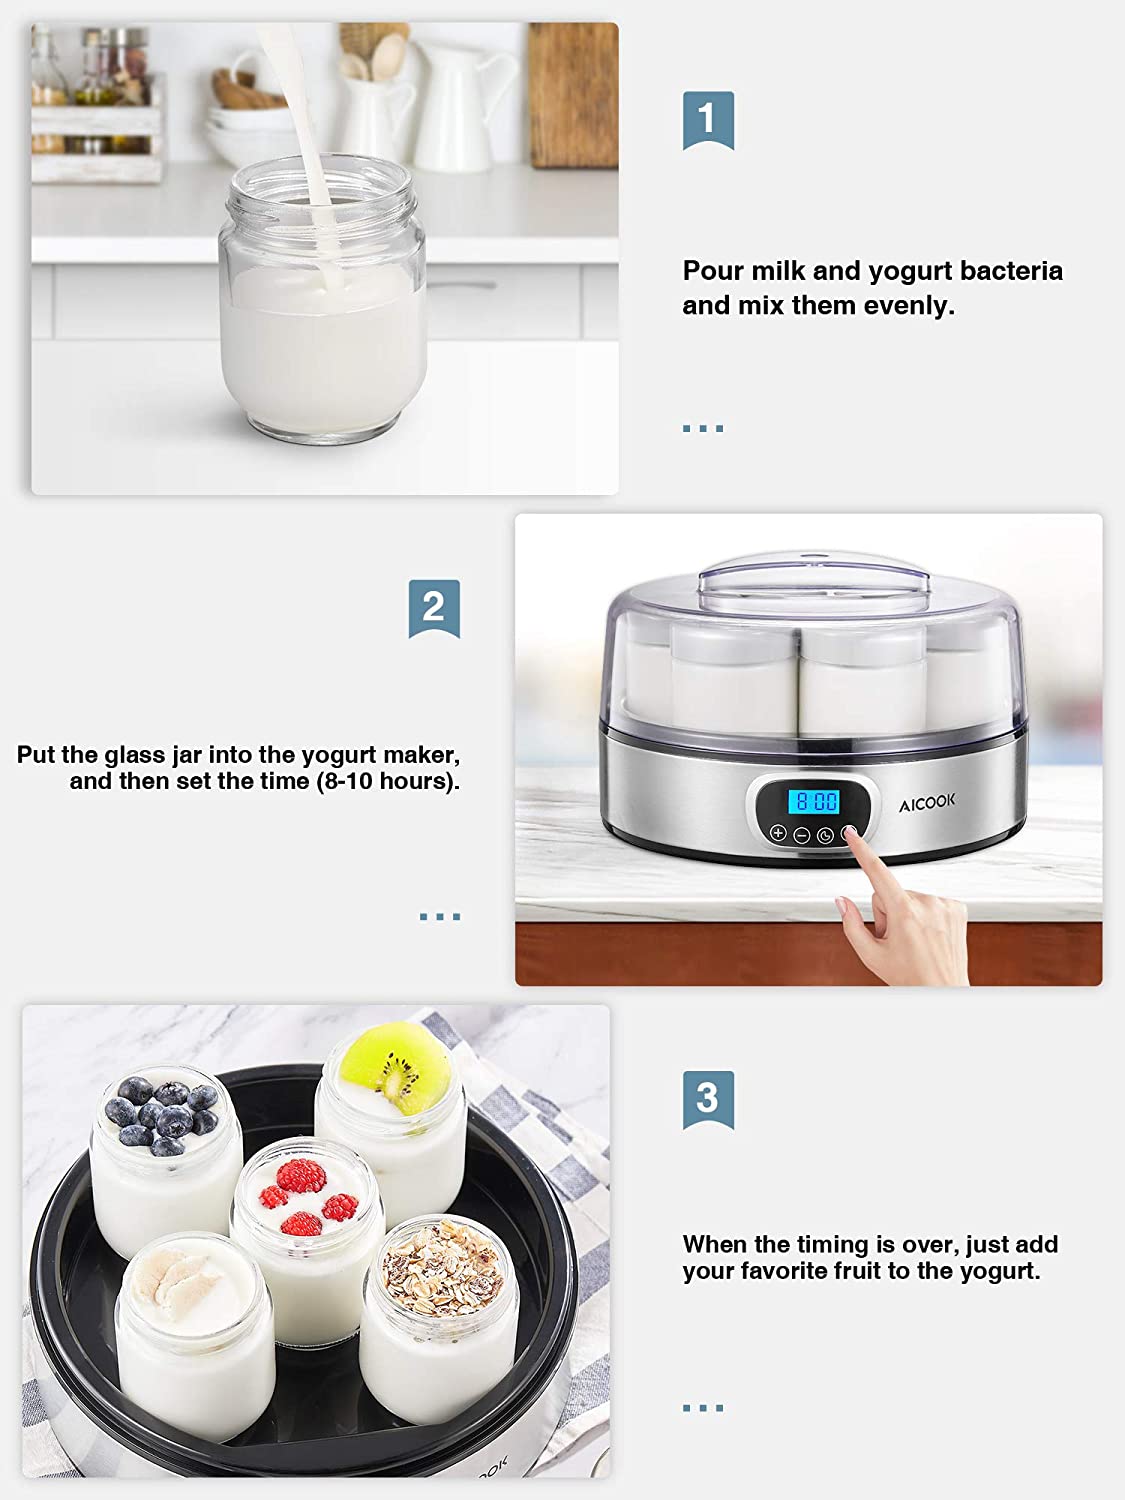 AICOOK | Yogurt Maker, Automatic Digital Yogurt Maker Machine with Timer Control & LCD Display, Stainless Steel Body, Easy To Use